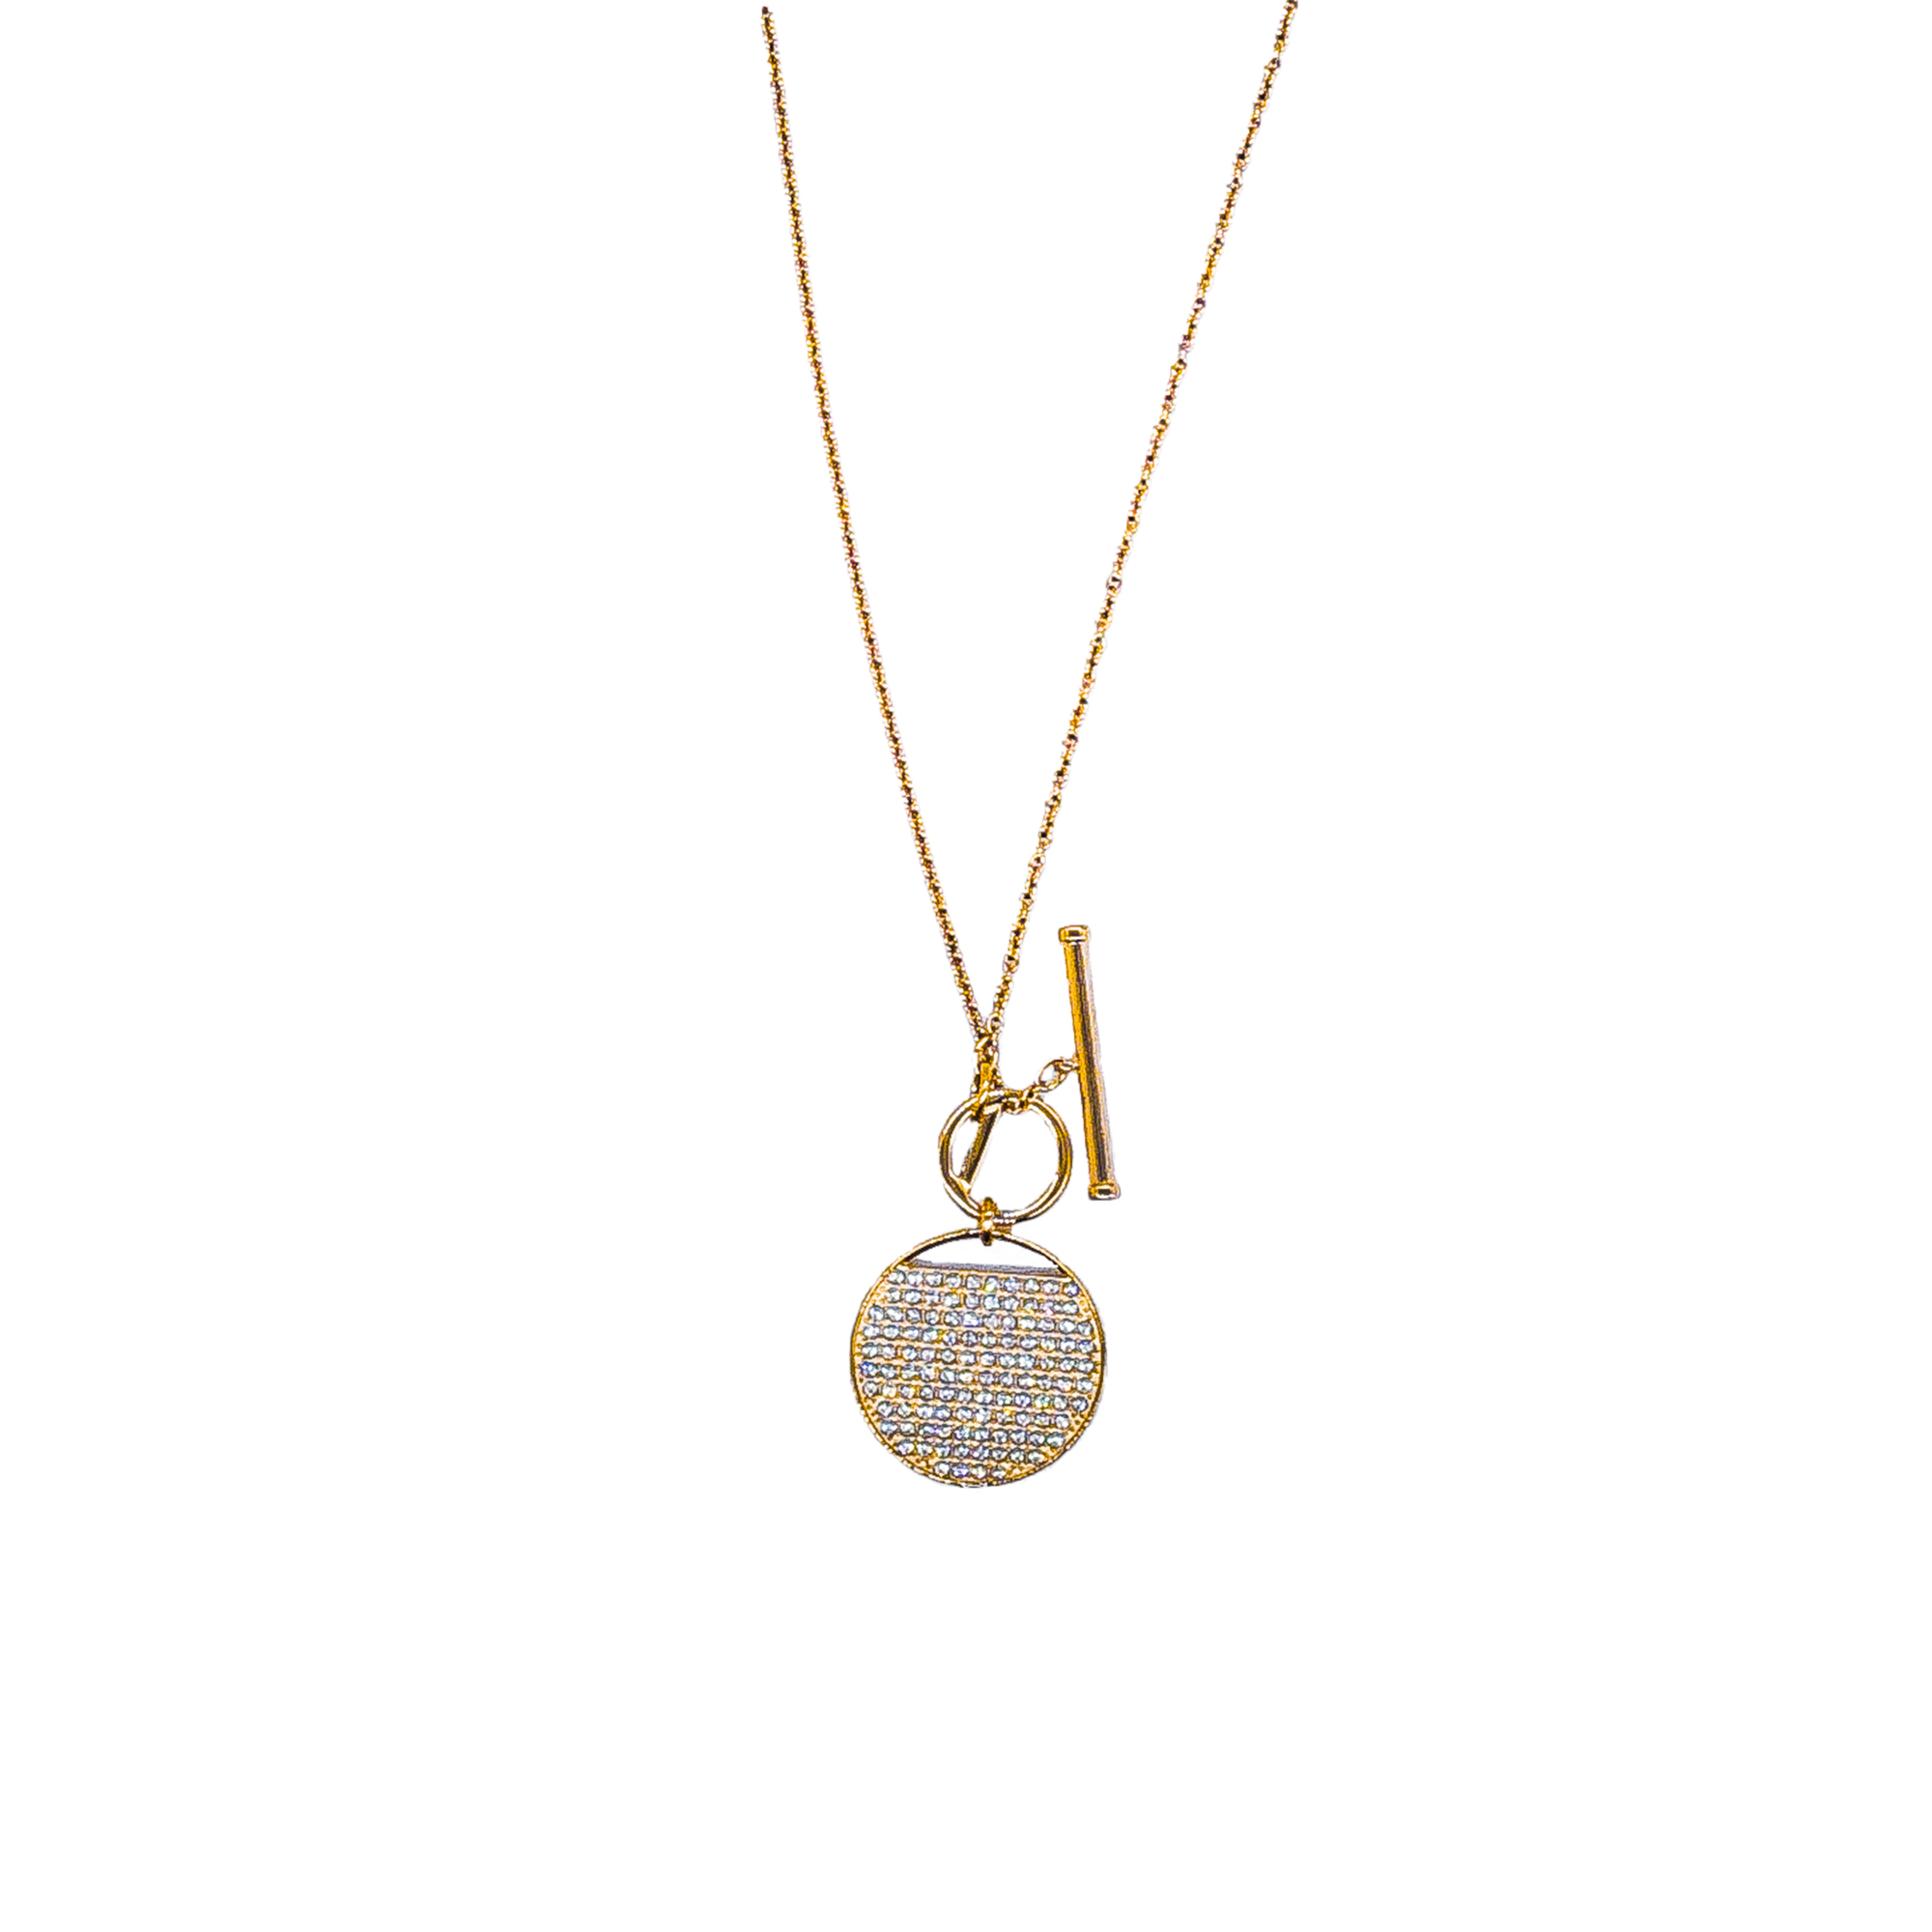 Swarovski Women's White Crystal and Rose Gold Plated Ginger T-Bar Pendant Necklace - image 1 of 2